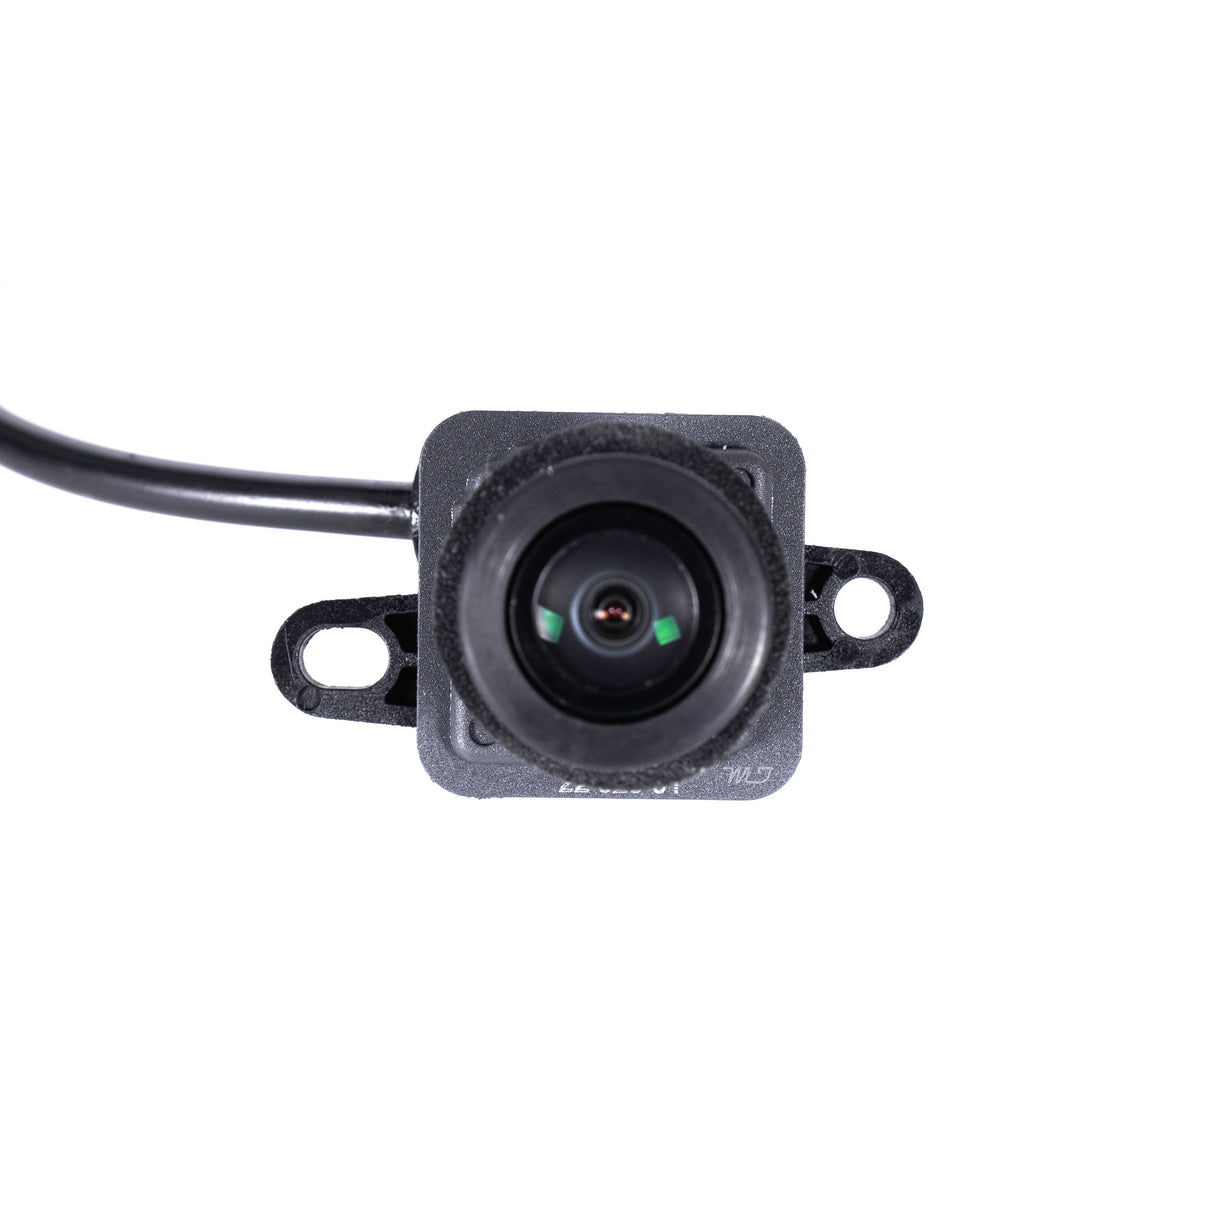 Dodge Dart (2013-2016) OEM Replacement Backup Camera OE Part # 56038990AA, 56038990AB, 56038990AC